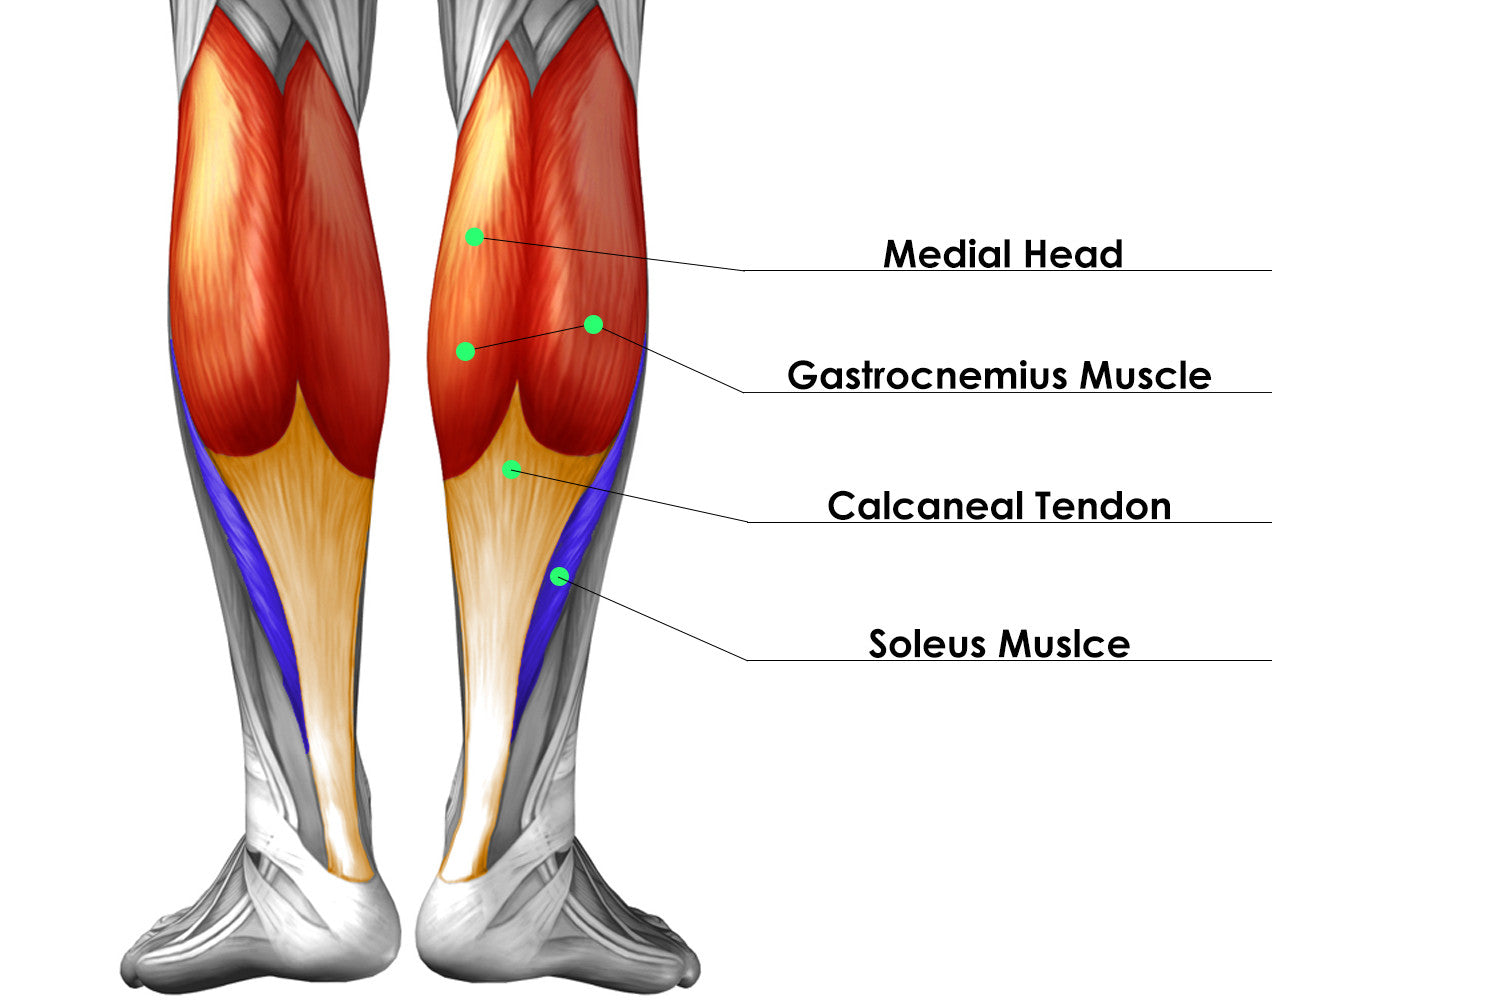 HOW TO GET BIGGER CALVES - GUIDE TO BIG CALF MUSCLES